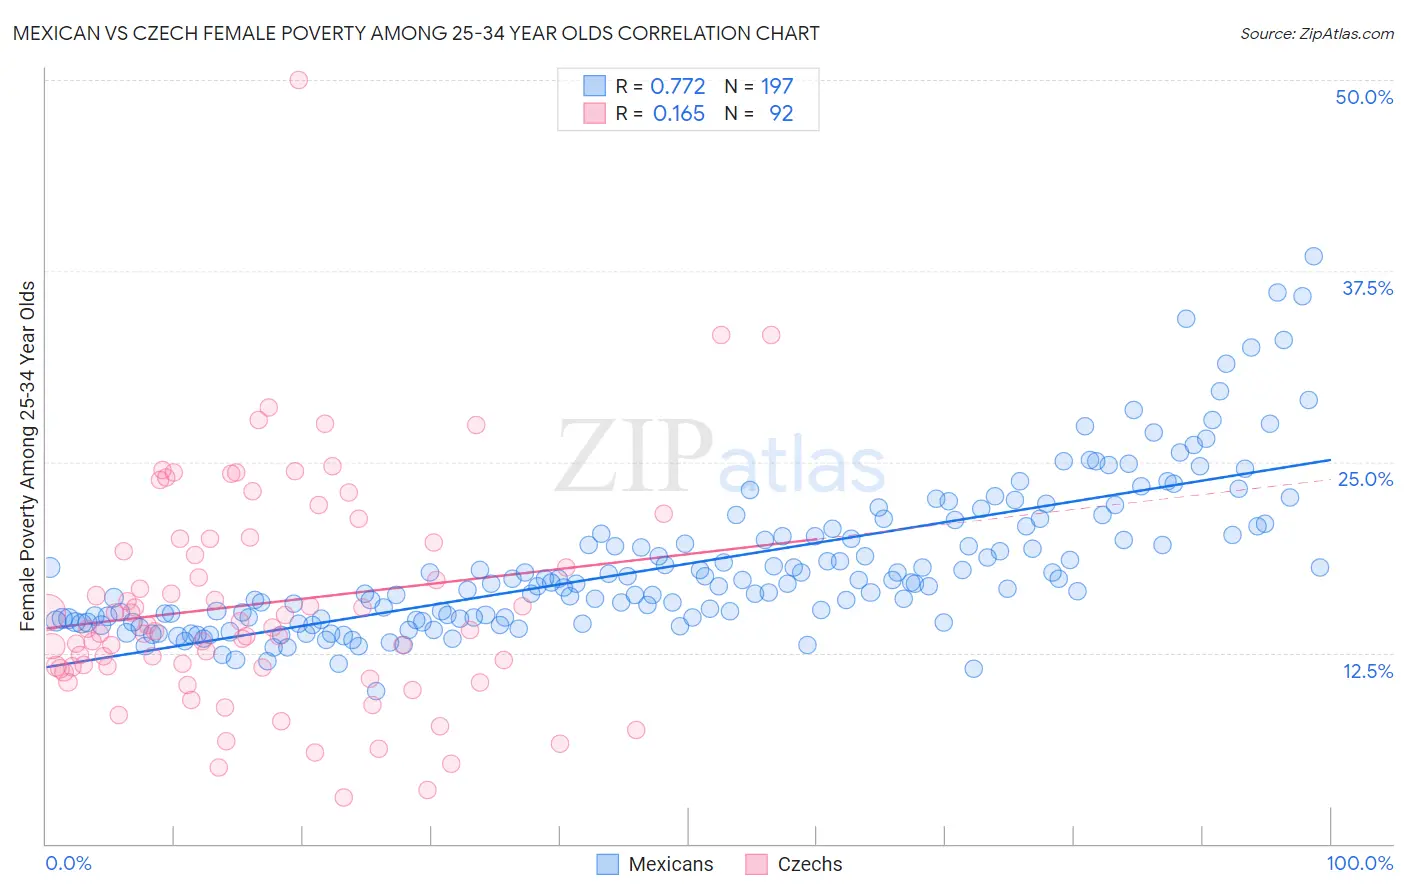 Mexican vs Czech Female Poverty Among 25-34 Year Olds